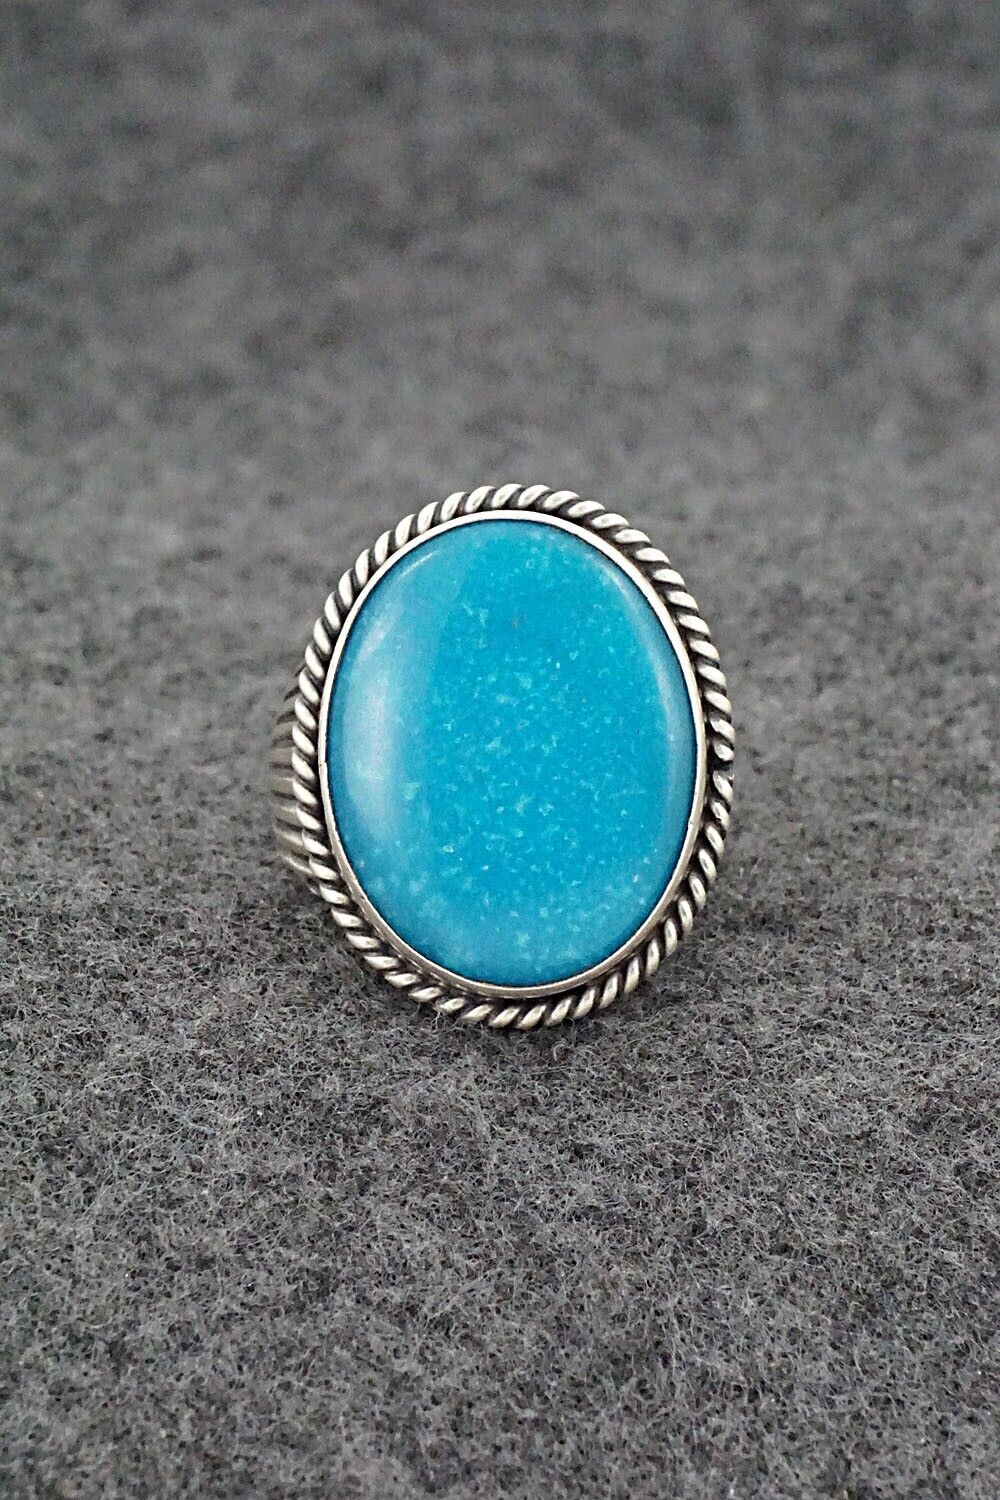 Turquoise & Sterling Silver Ring - Samuel Yellowhair - Size 7.75